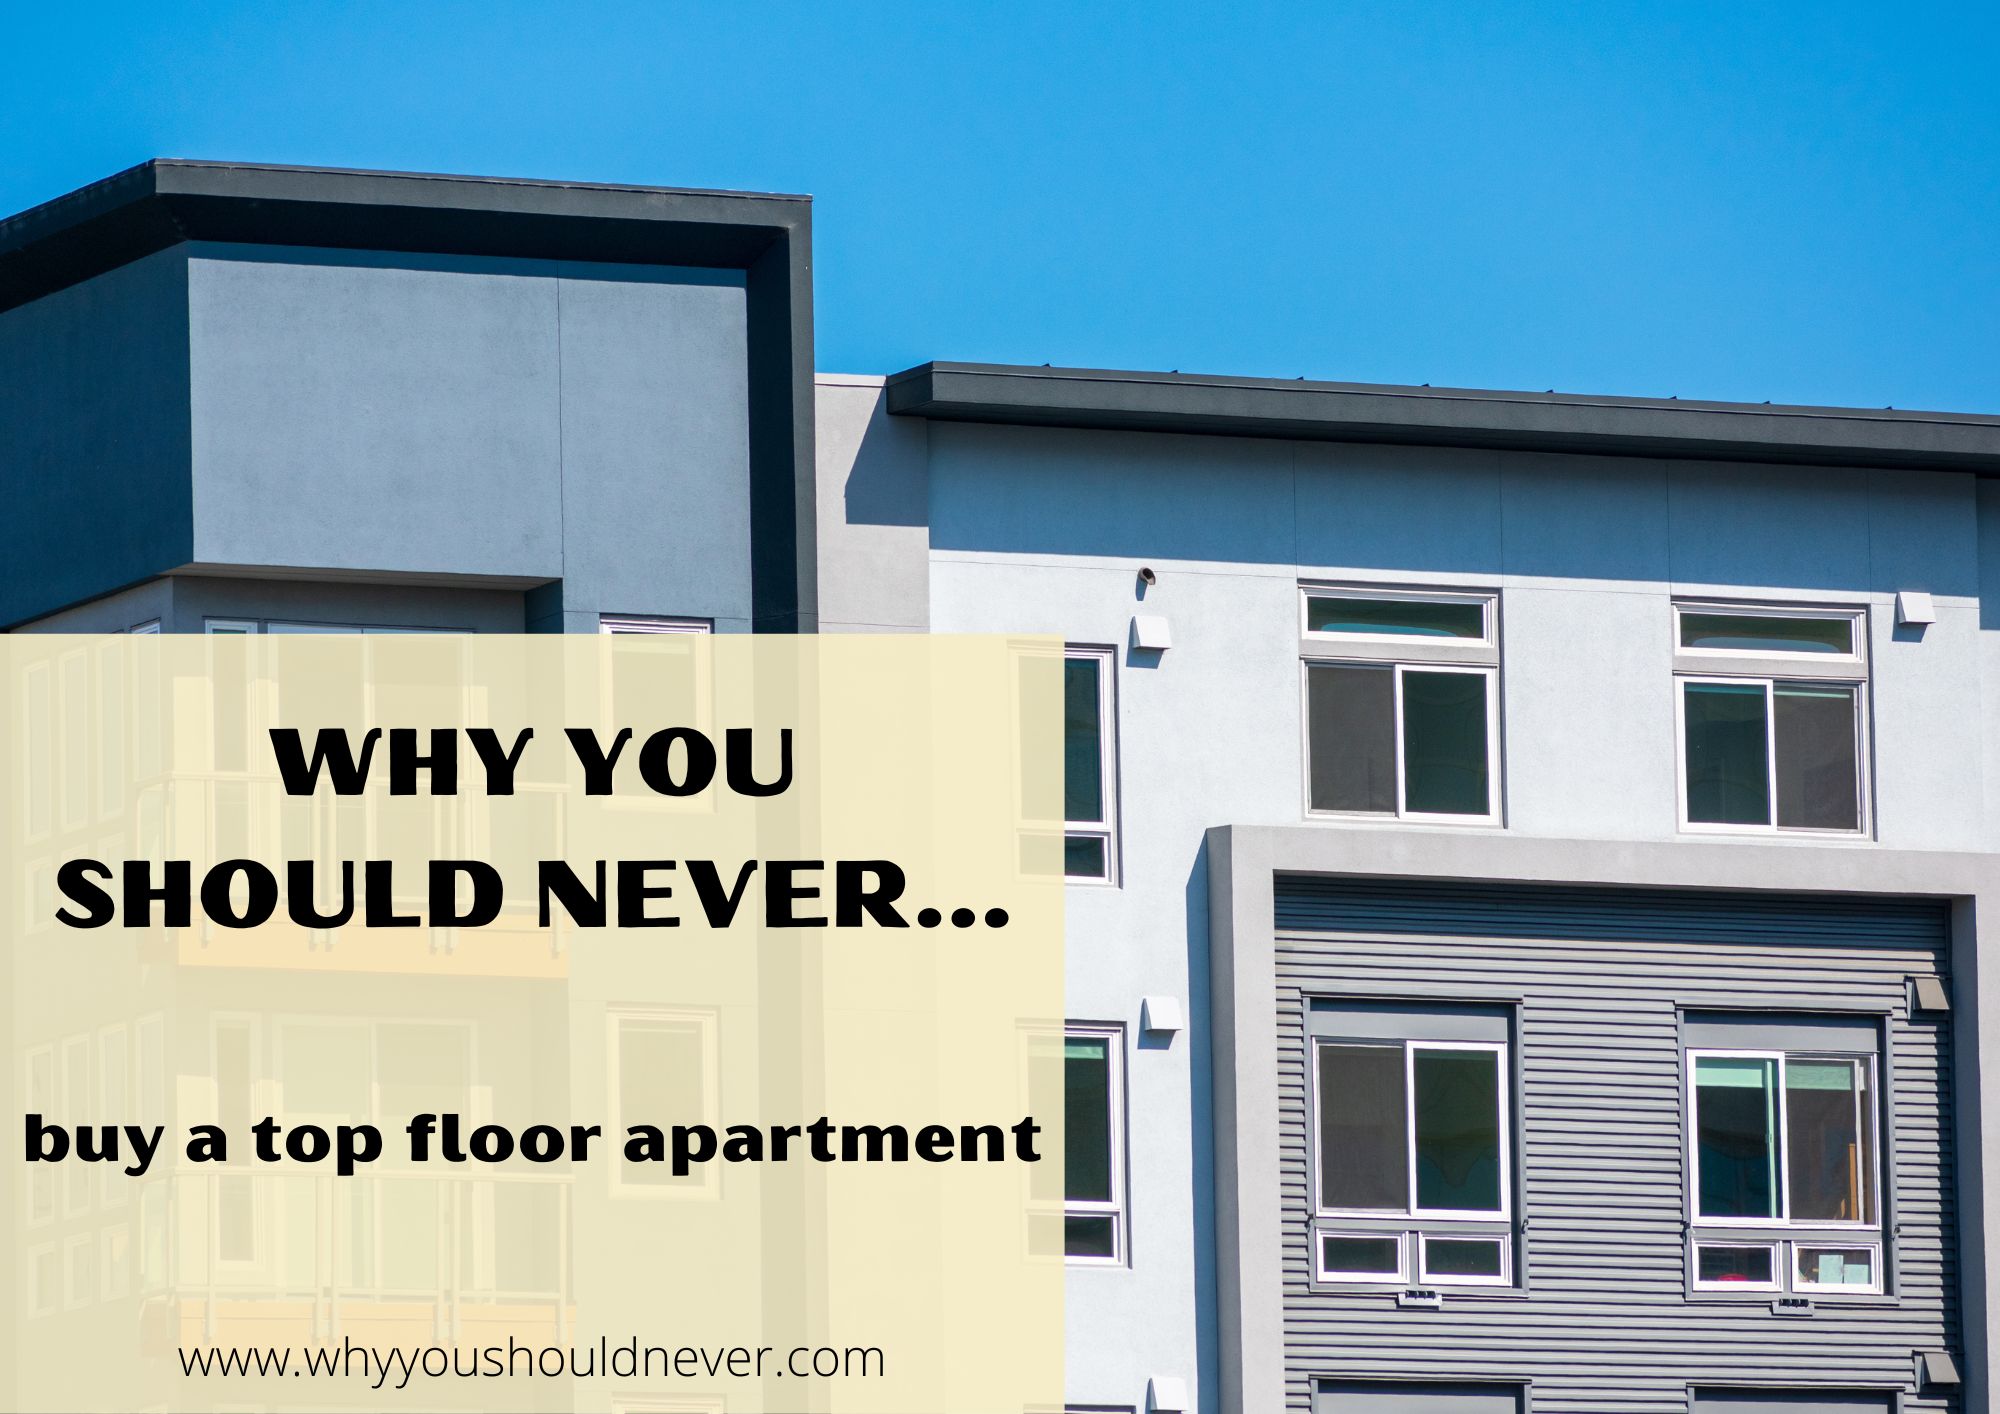 Why You Should Never Buy A Top Floor Apartment